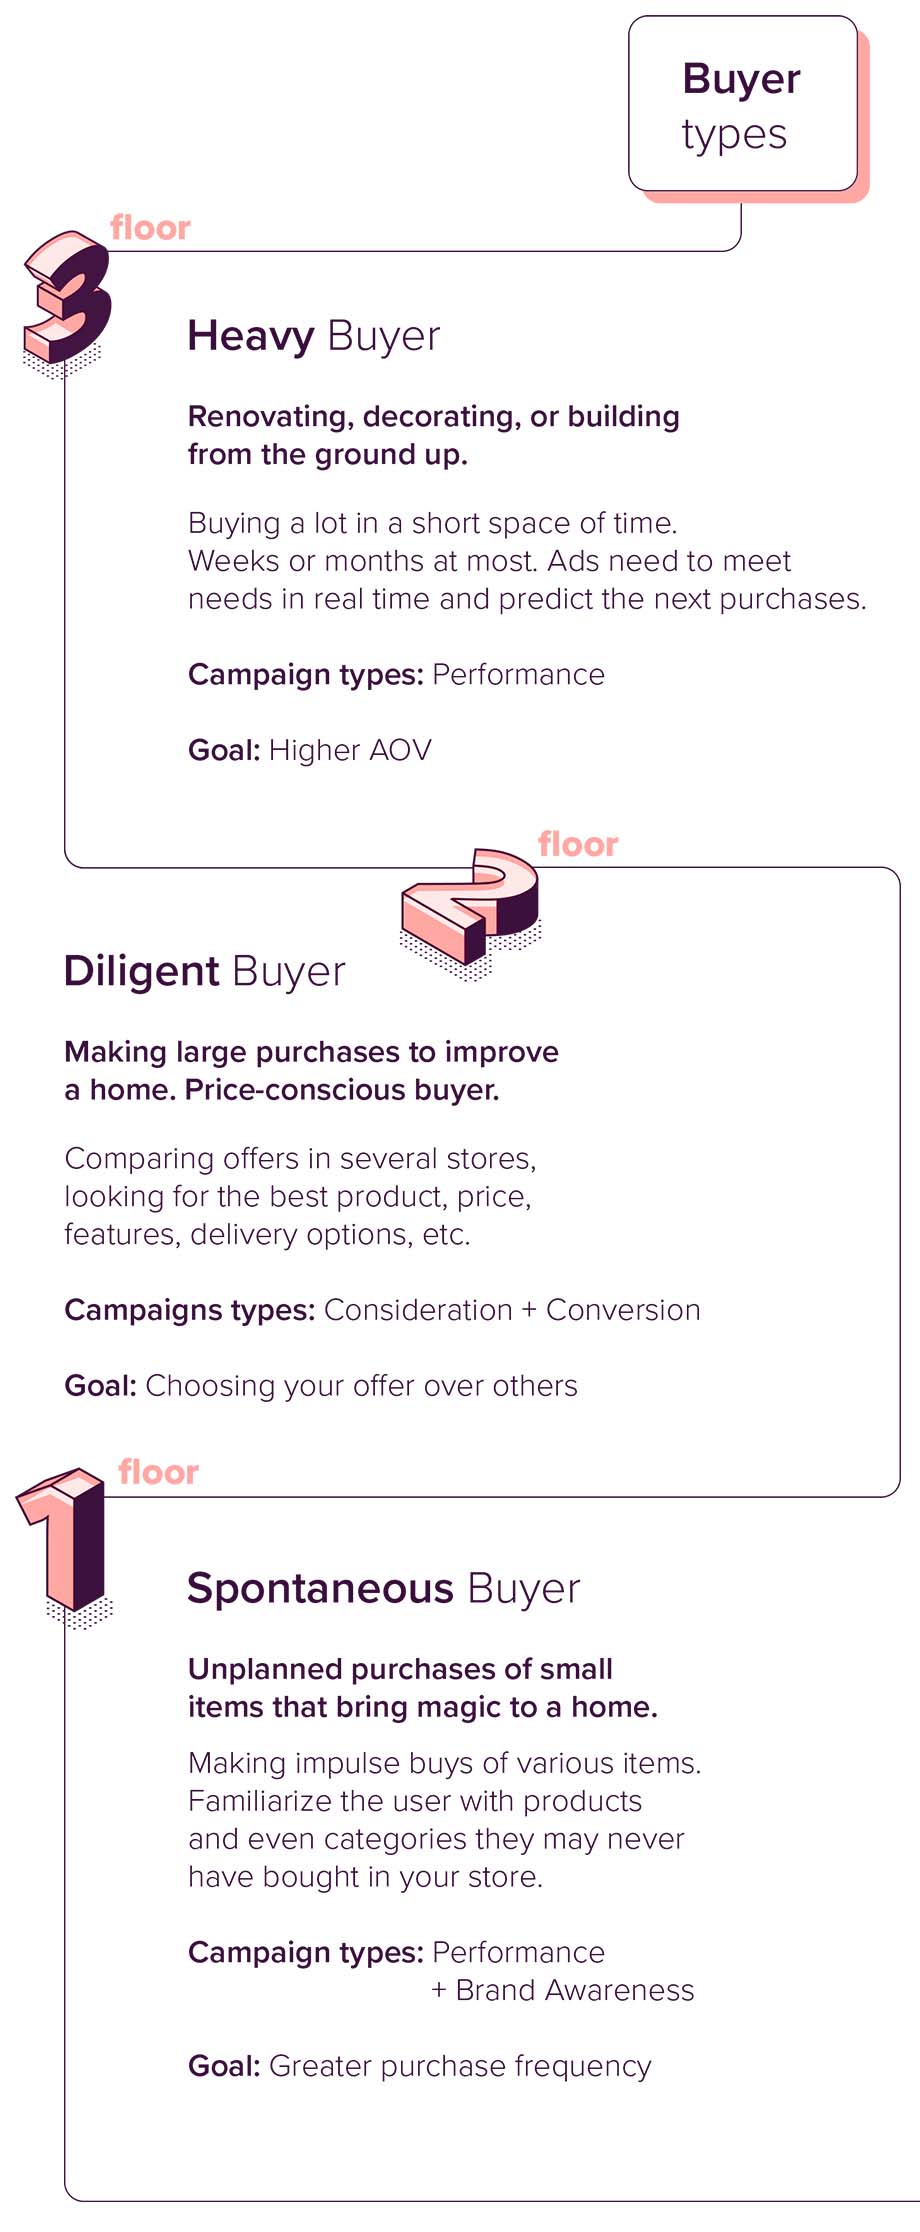 Different types of buyers